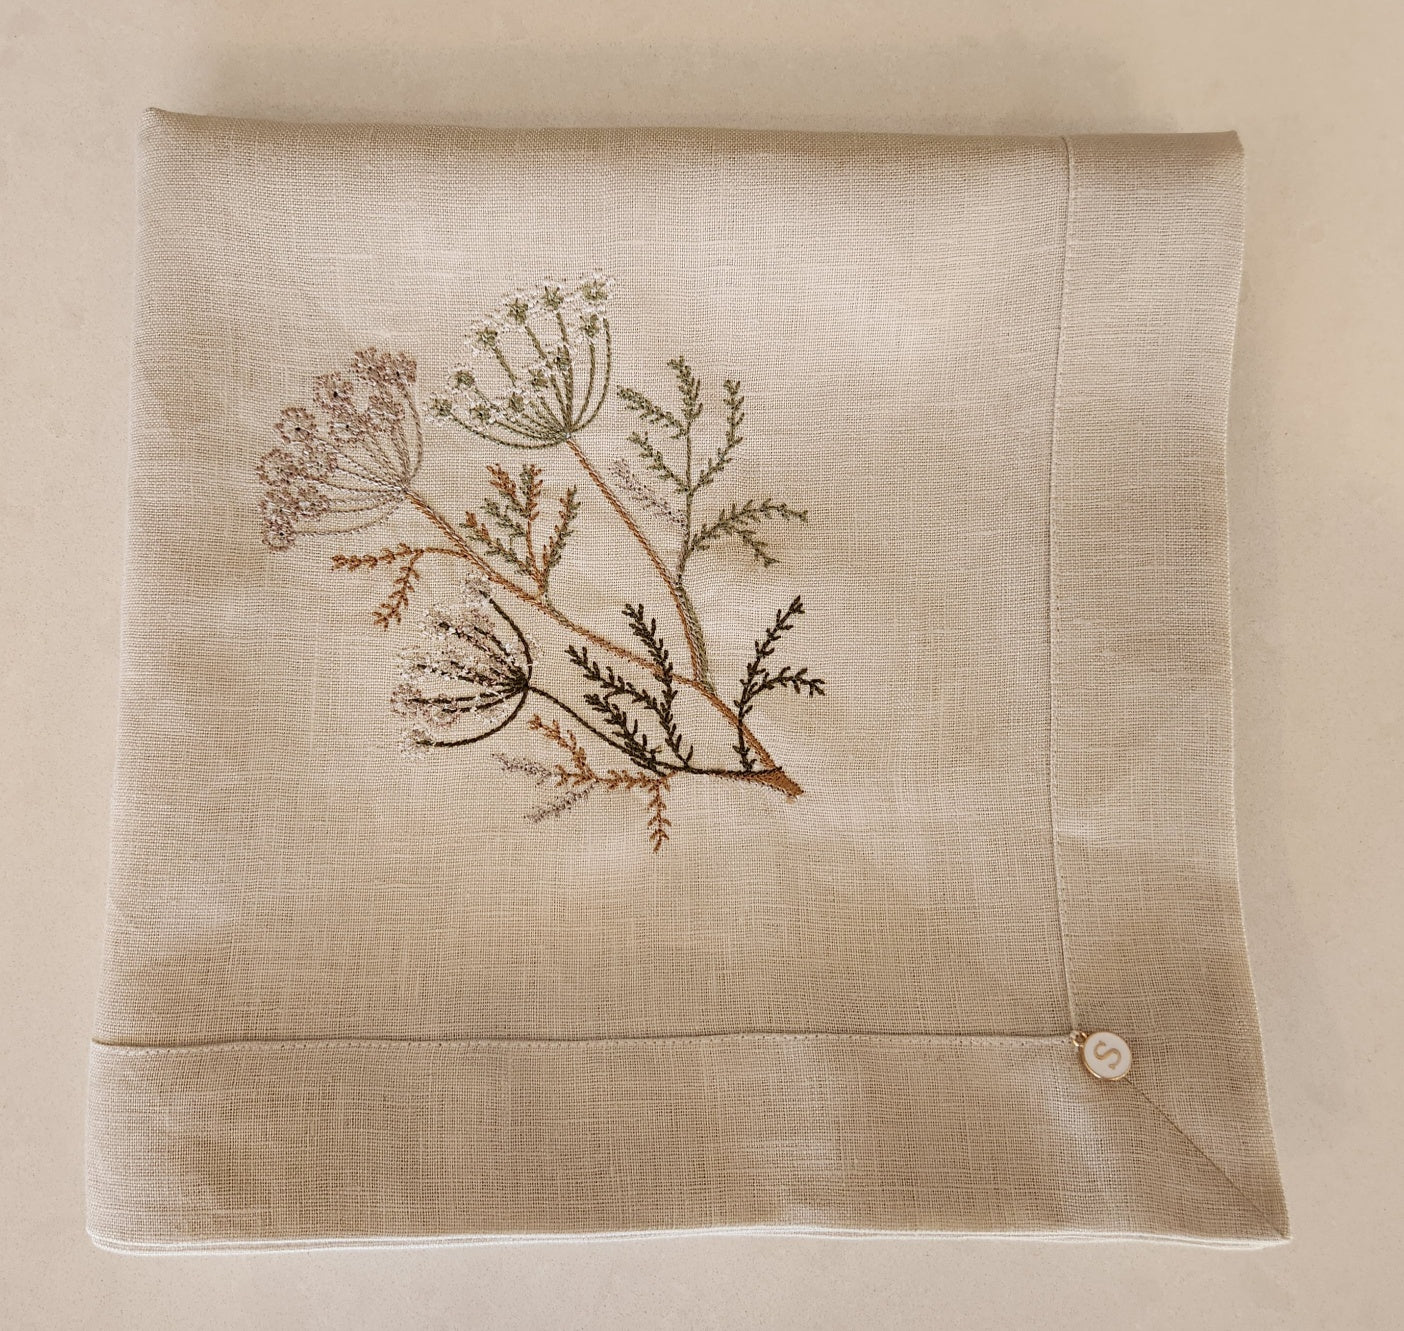 Exclusive Baby Wrap & Pillowcase Set, Natural Linen with embroidered Floral Branch